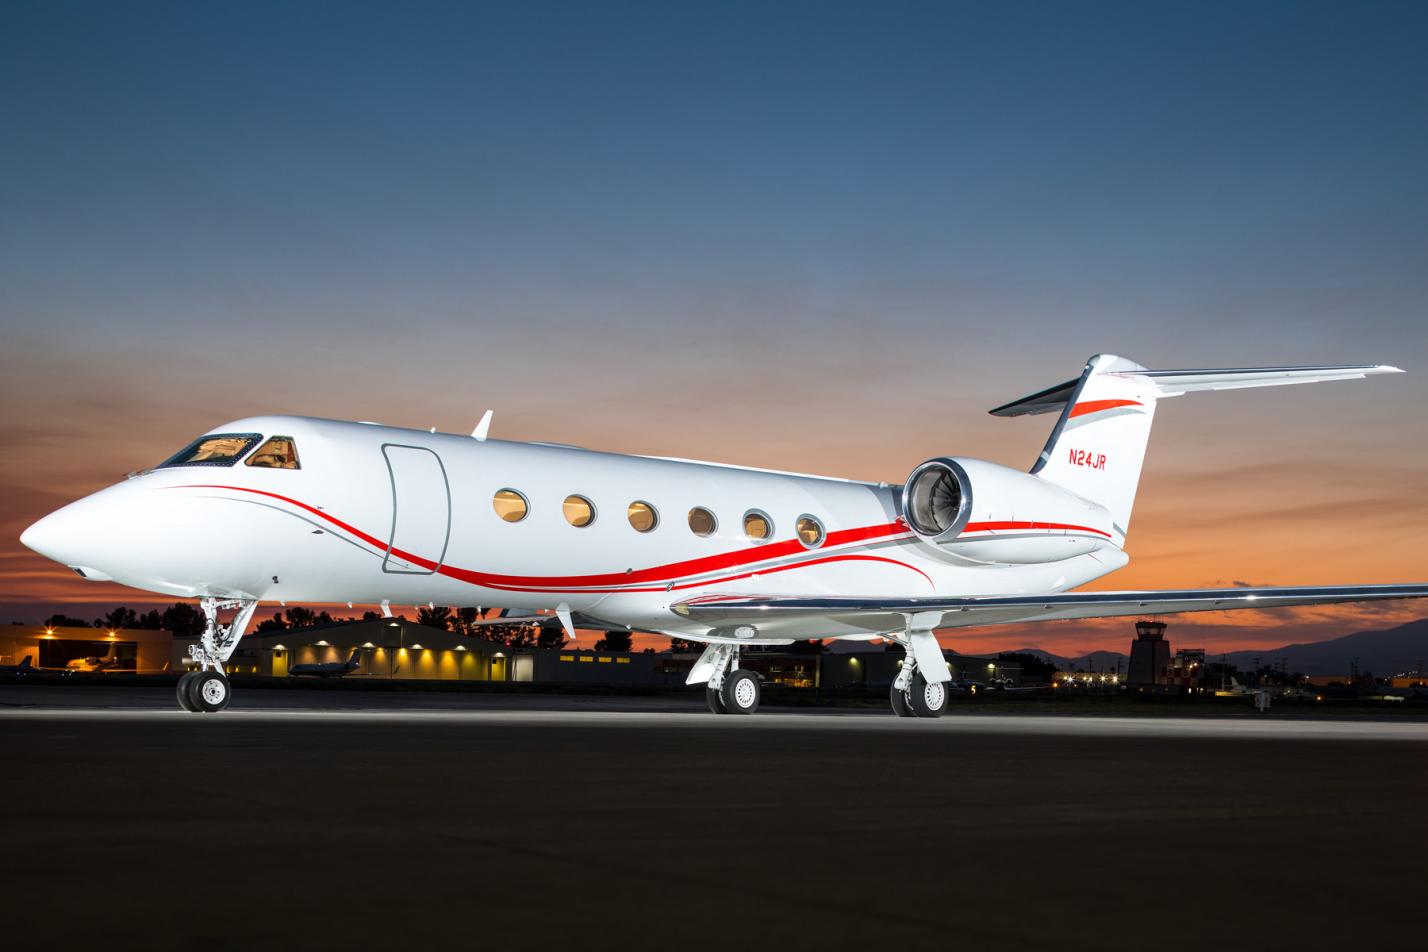 What Are the Differences Between the Gulfstream G650 and G700?